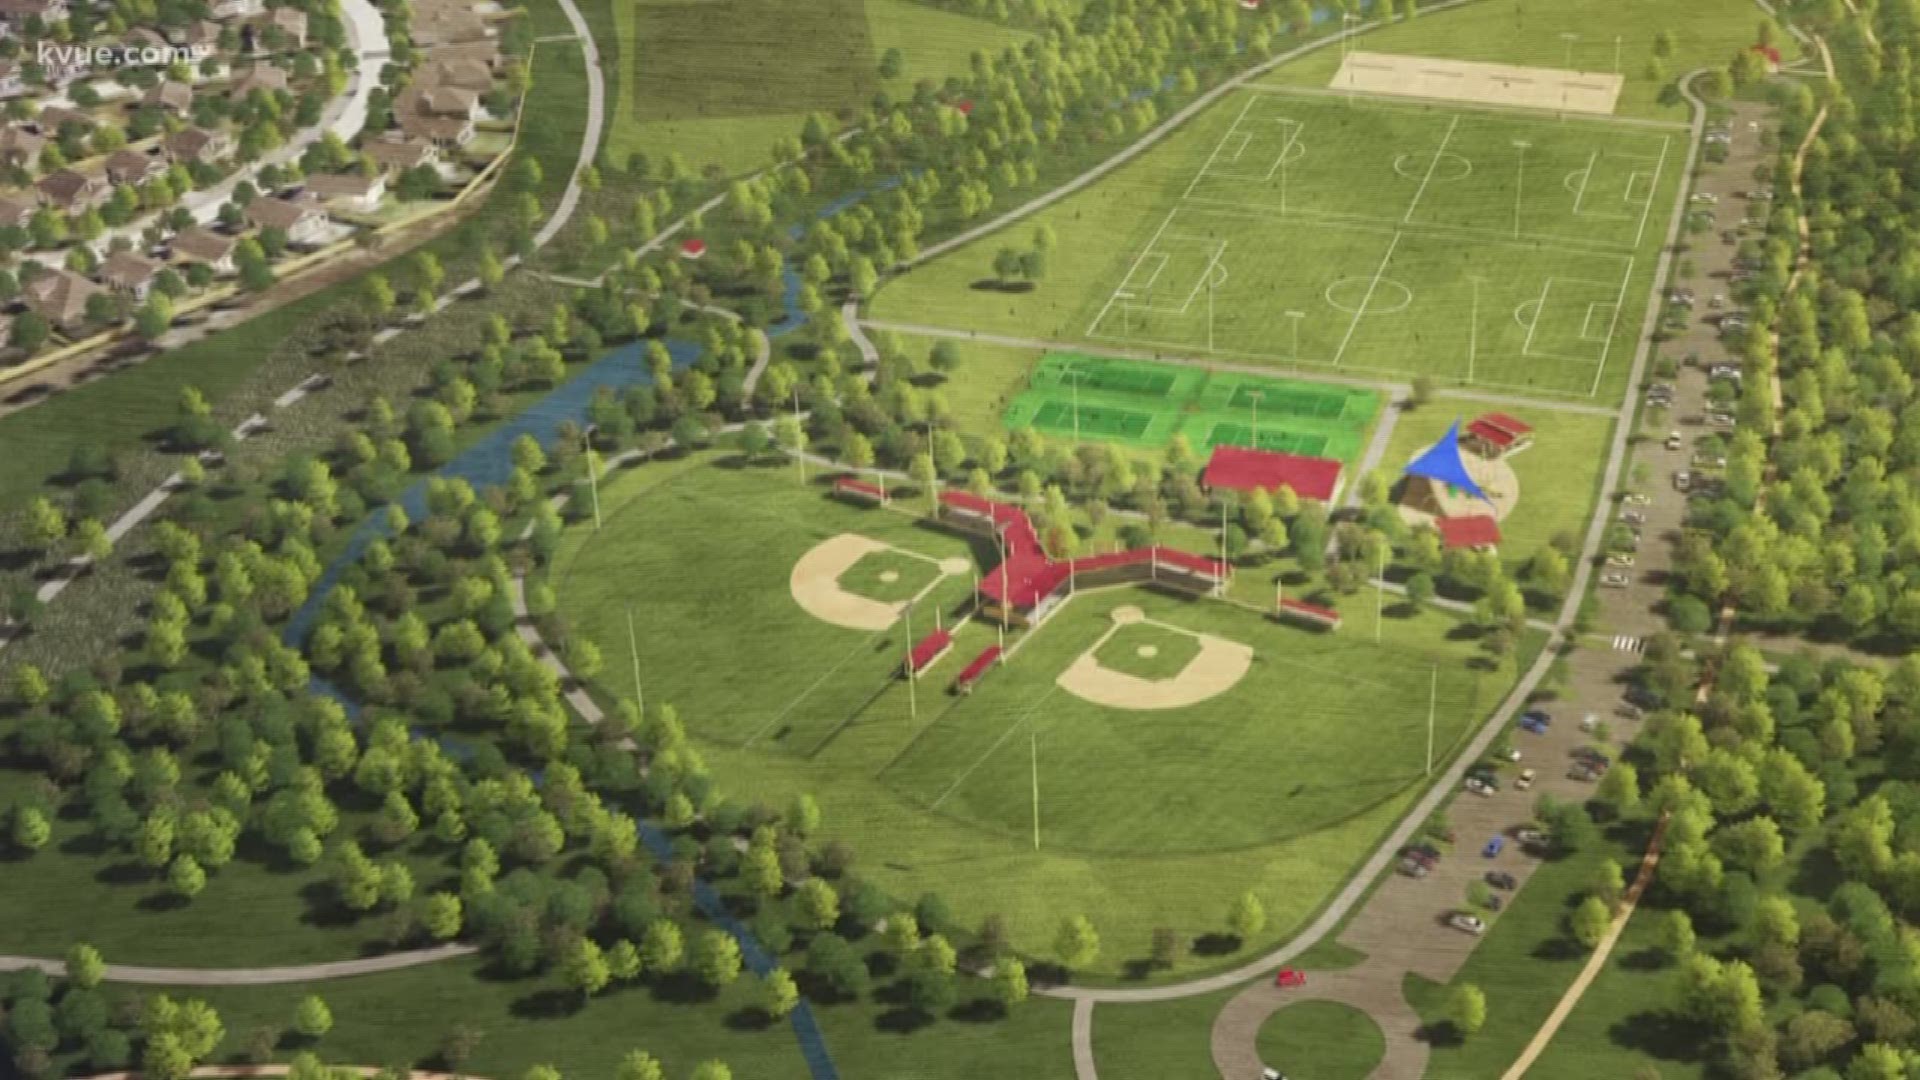 The Lakeline Park will be 189 acres, the largest park in the area of Cedar Park near Austin.